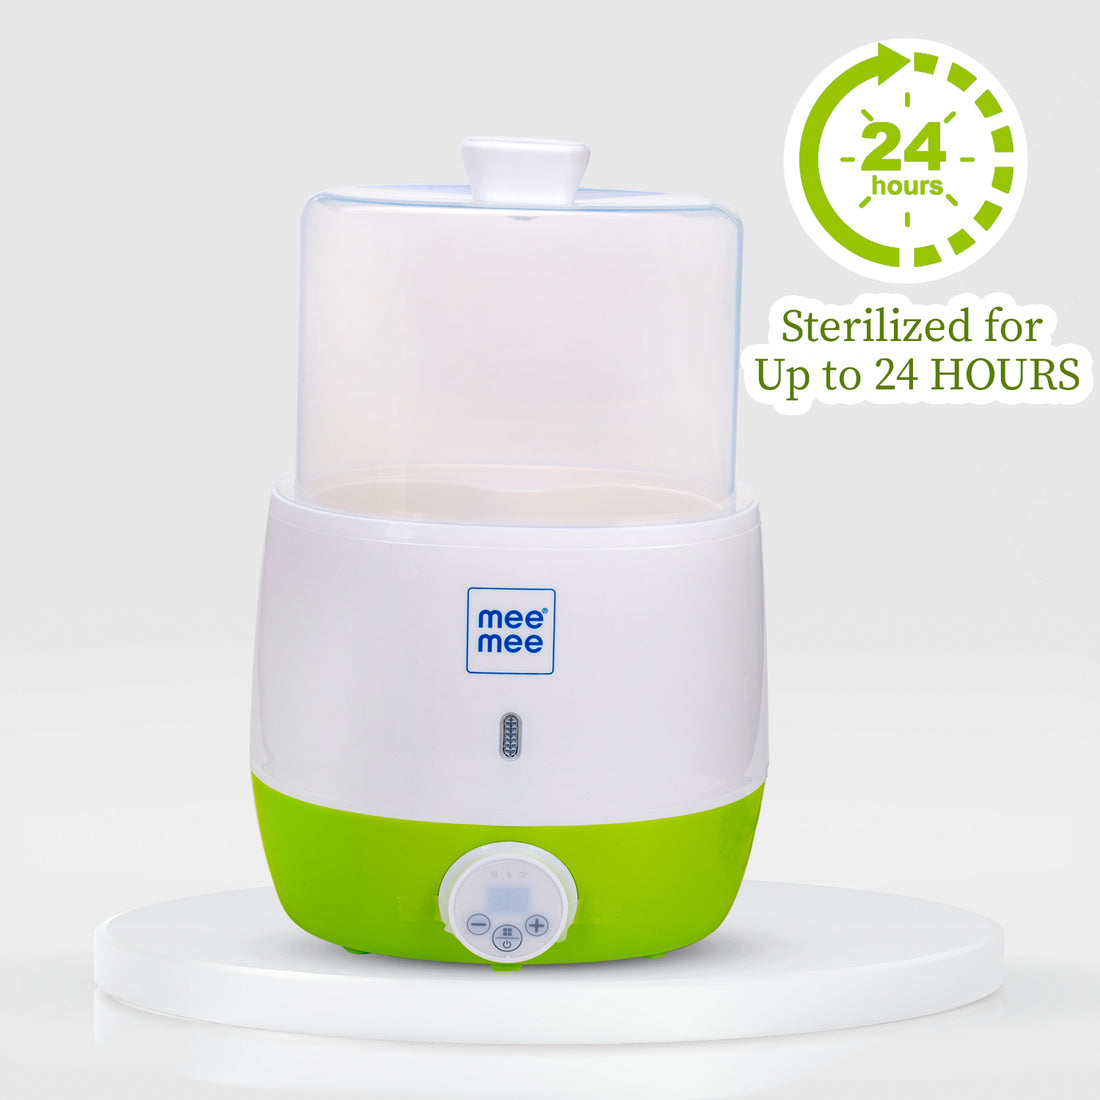 Mee Mee - Steam Digital Sterilizer sterilized for up to 24 HOURS